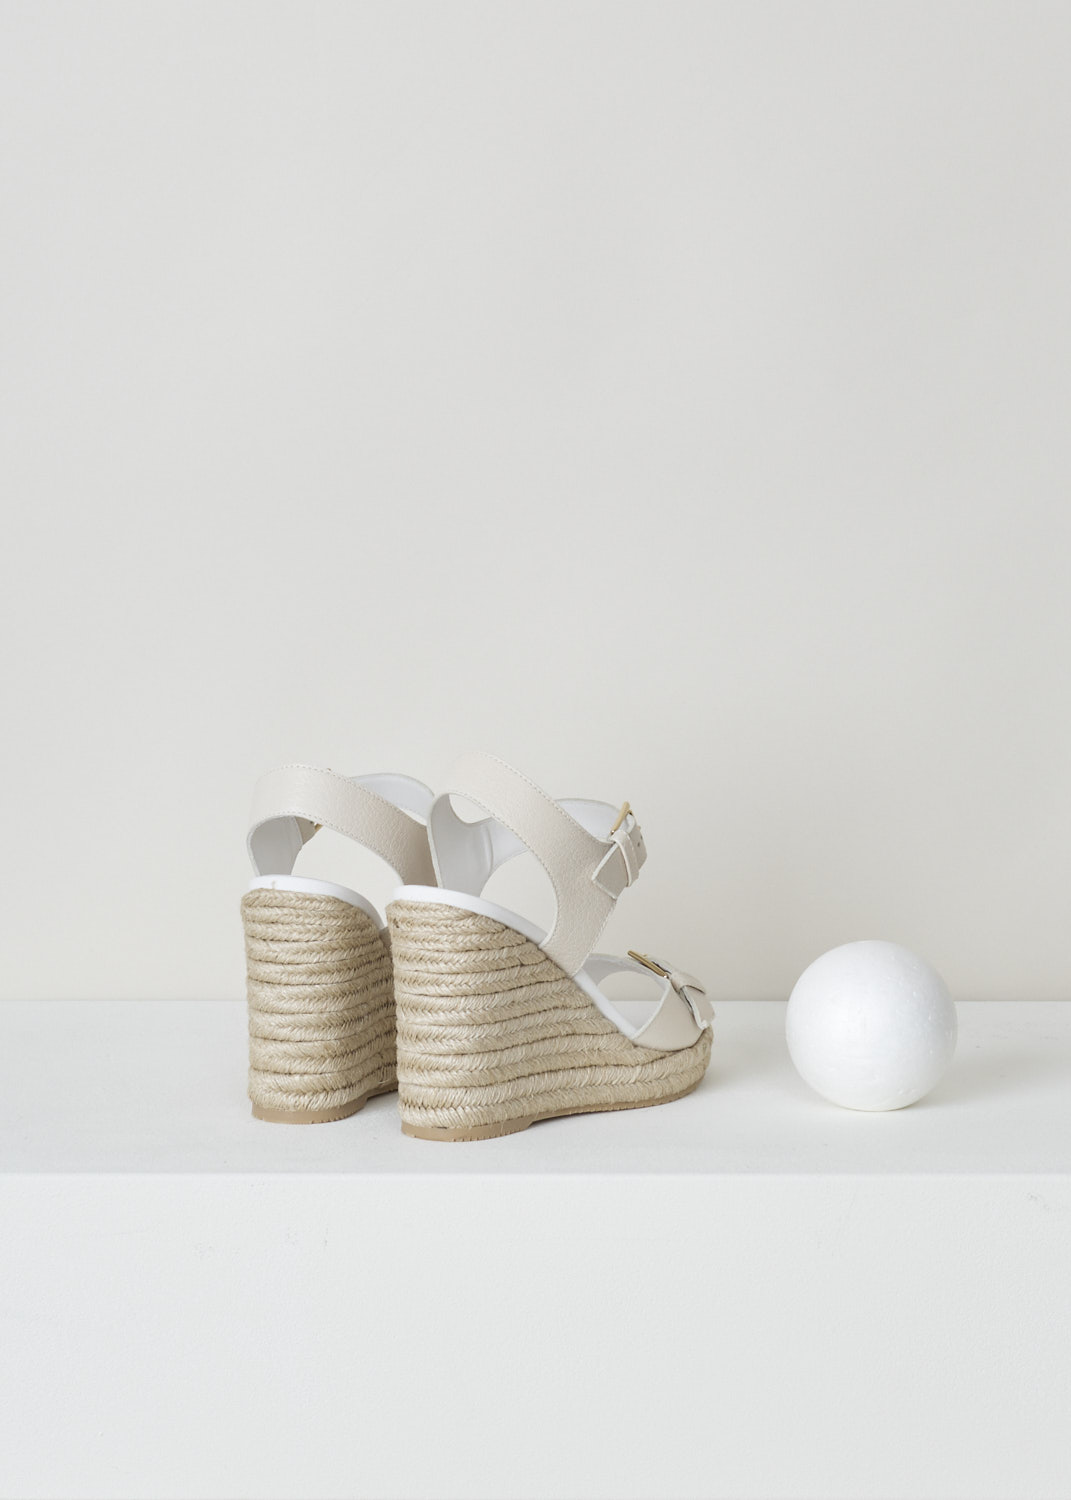 Hogan, Wedge heeled sandals in beige, HXW5580DL20P7KB018_H558_P7K, beige, back, These lovely cream coloured wedge heeled sandals fills us all with summer vibes. Featuring a single strap over the vamp with an gold-tone ornamental buckle. The ankle strap however, has a functional buckle which acts as your fastening option. 

Heel height: 11 cm / 4.3 inch. 